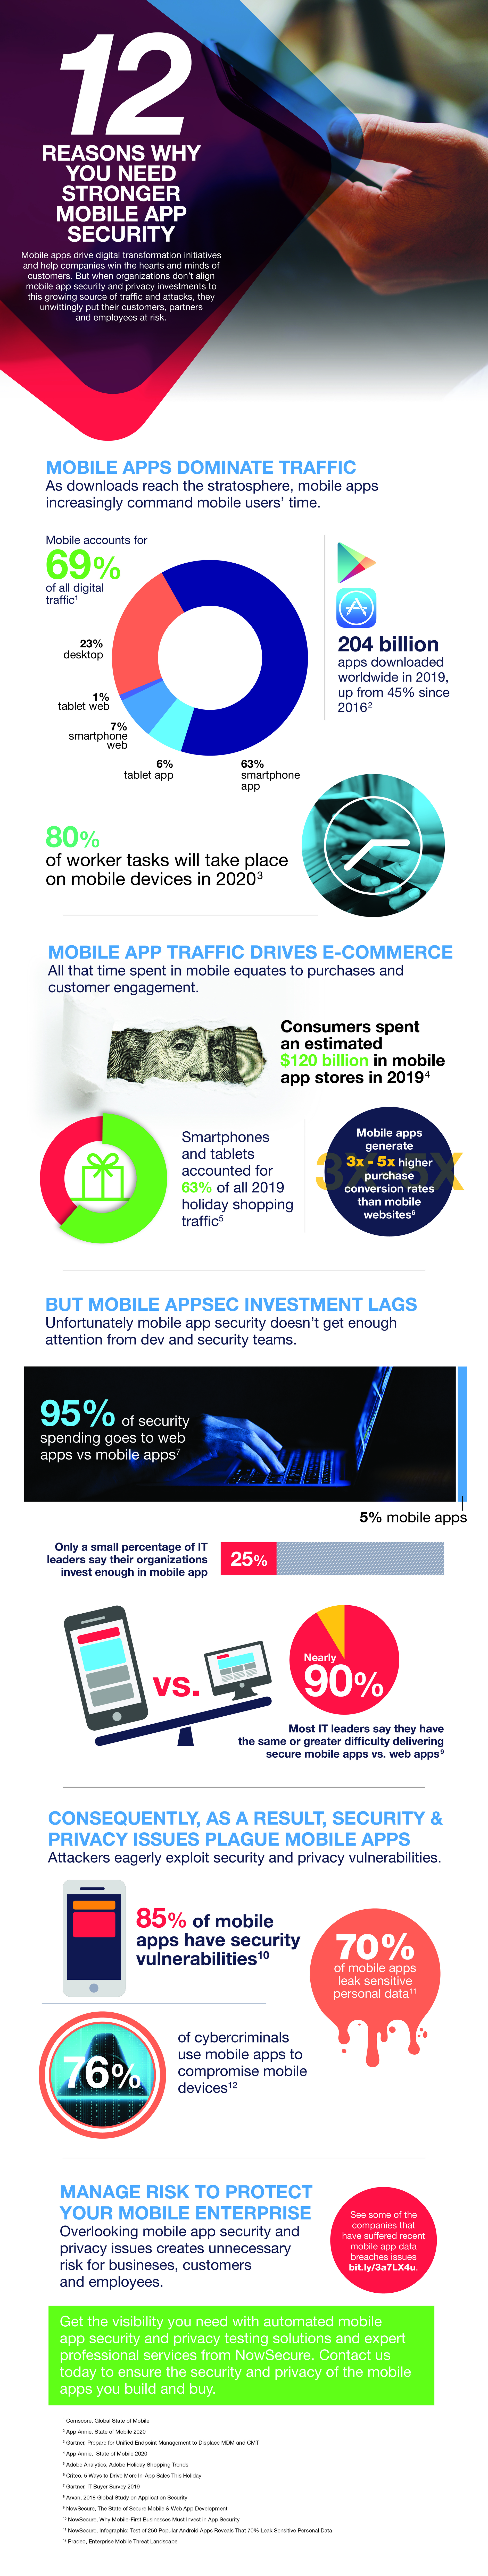 12 Reasons for Stronger Mobile App Security